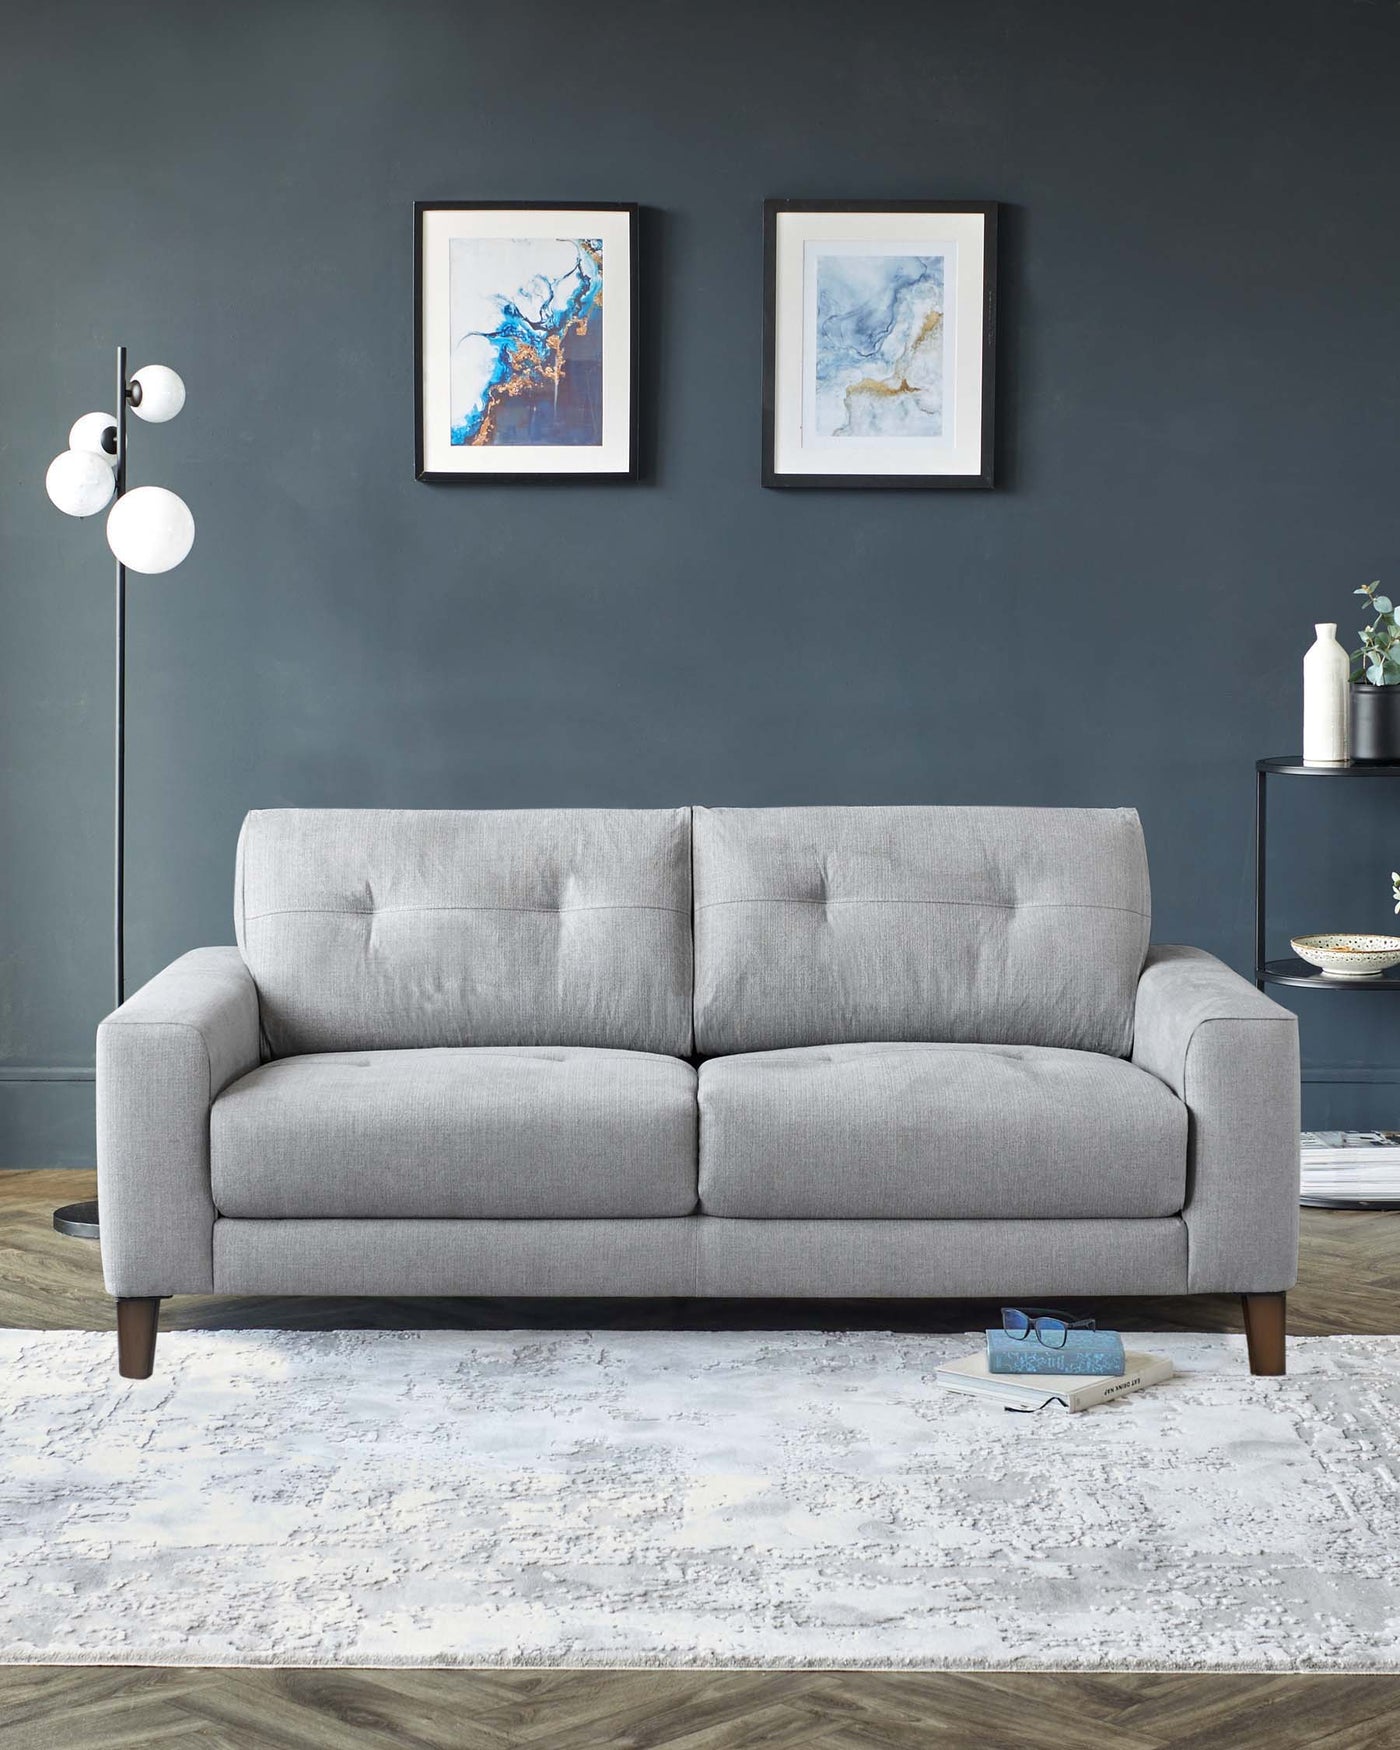 Modern three-seater sofa with tailored lines and dark wooden legs, upholstered in light grey fabric. Positioned on a white and grey patterned area rug, set against a dark grey wall featuring abstract framed artwork.